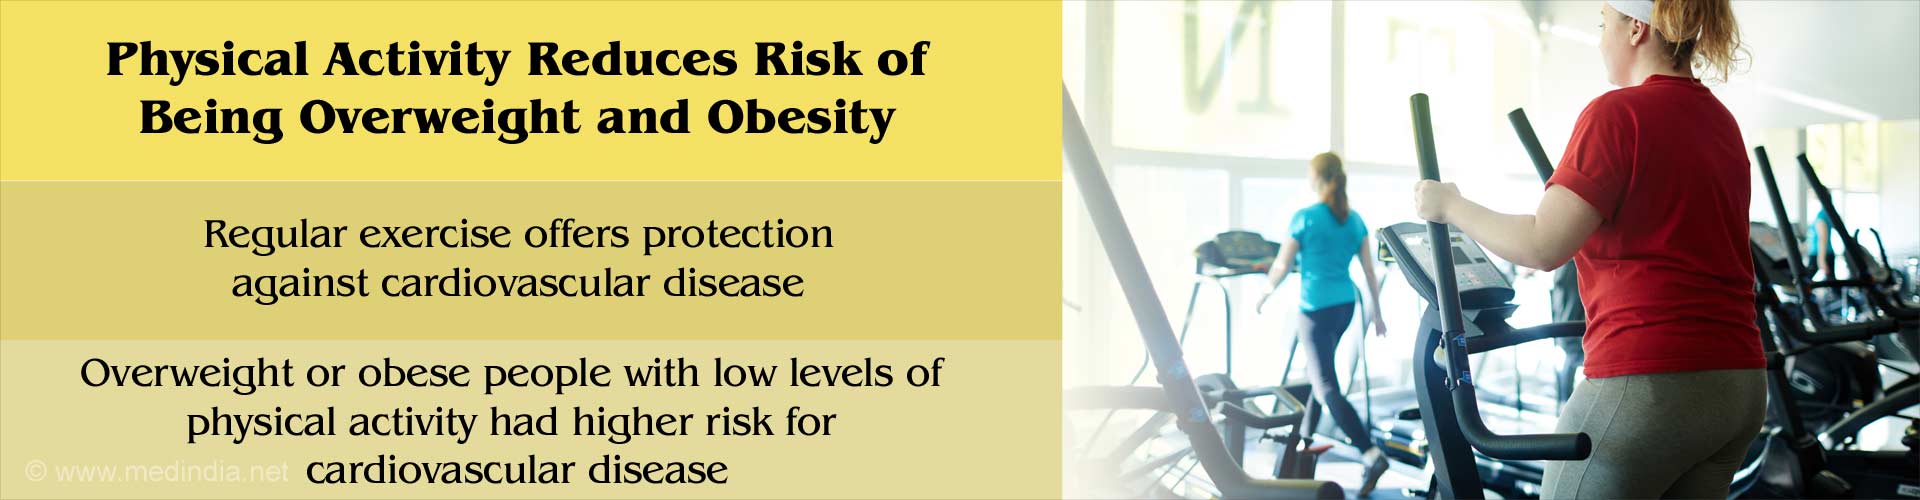 physical activity reduces risk of being overweight and obesity
- regular exercise offers protection against cardiovascular disease
- overweight or obese people with low levels of physical activity had higher risk for cardiovascular disease